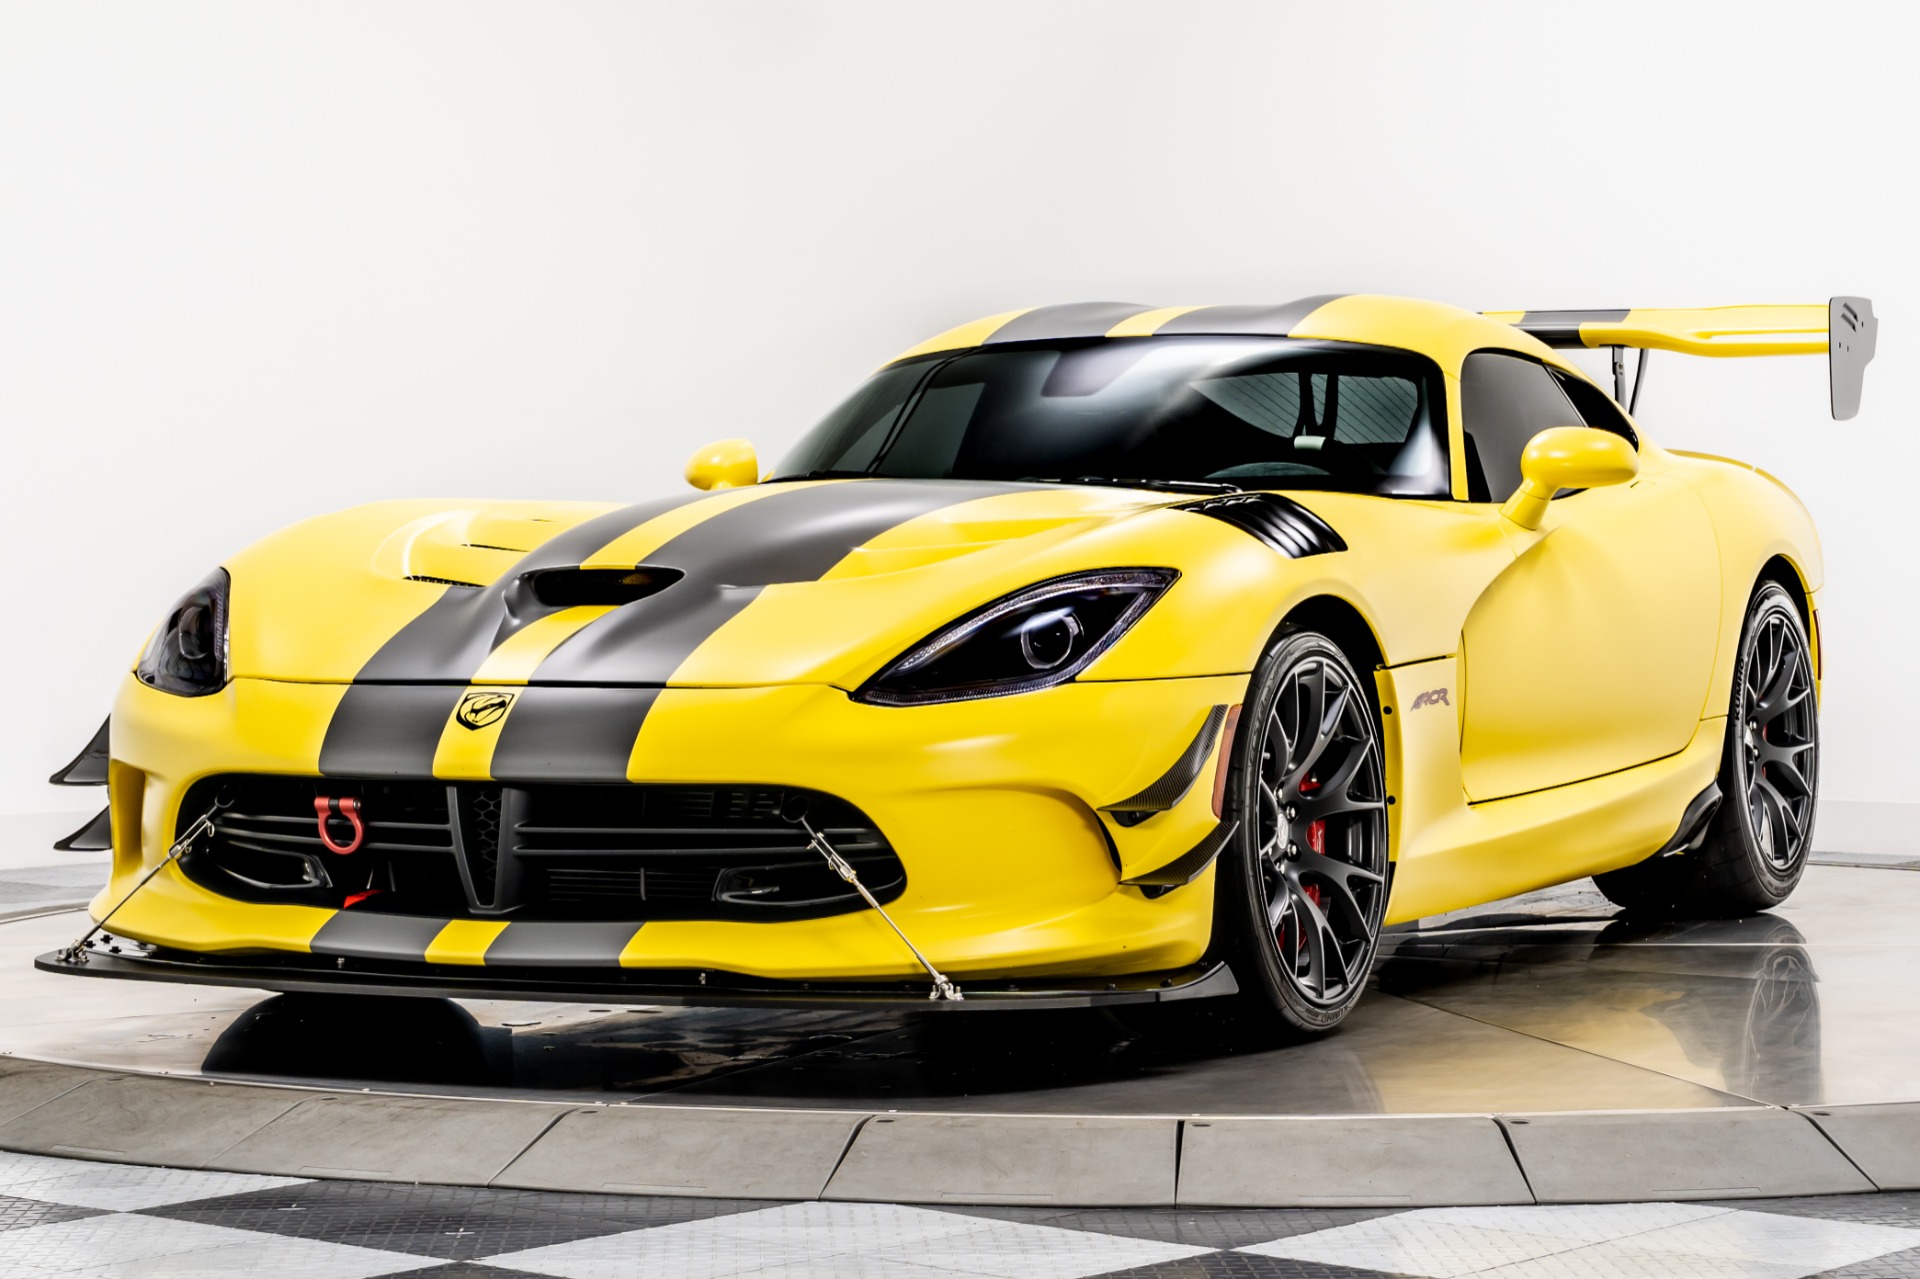 Used 16 Dodge Viper Acr Extreme Aero For Sale Sold Marshall Goldman Beverly Hills Stock Xviperacr